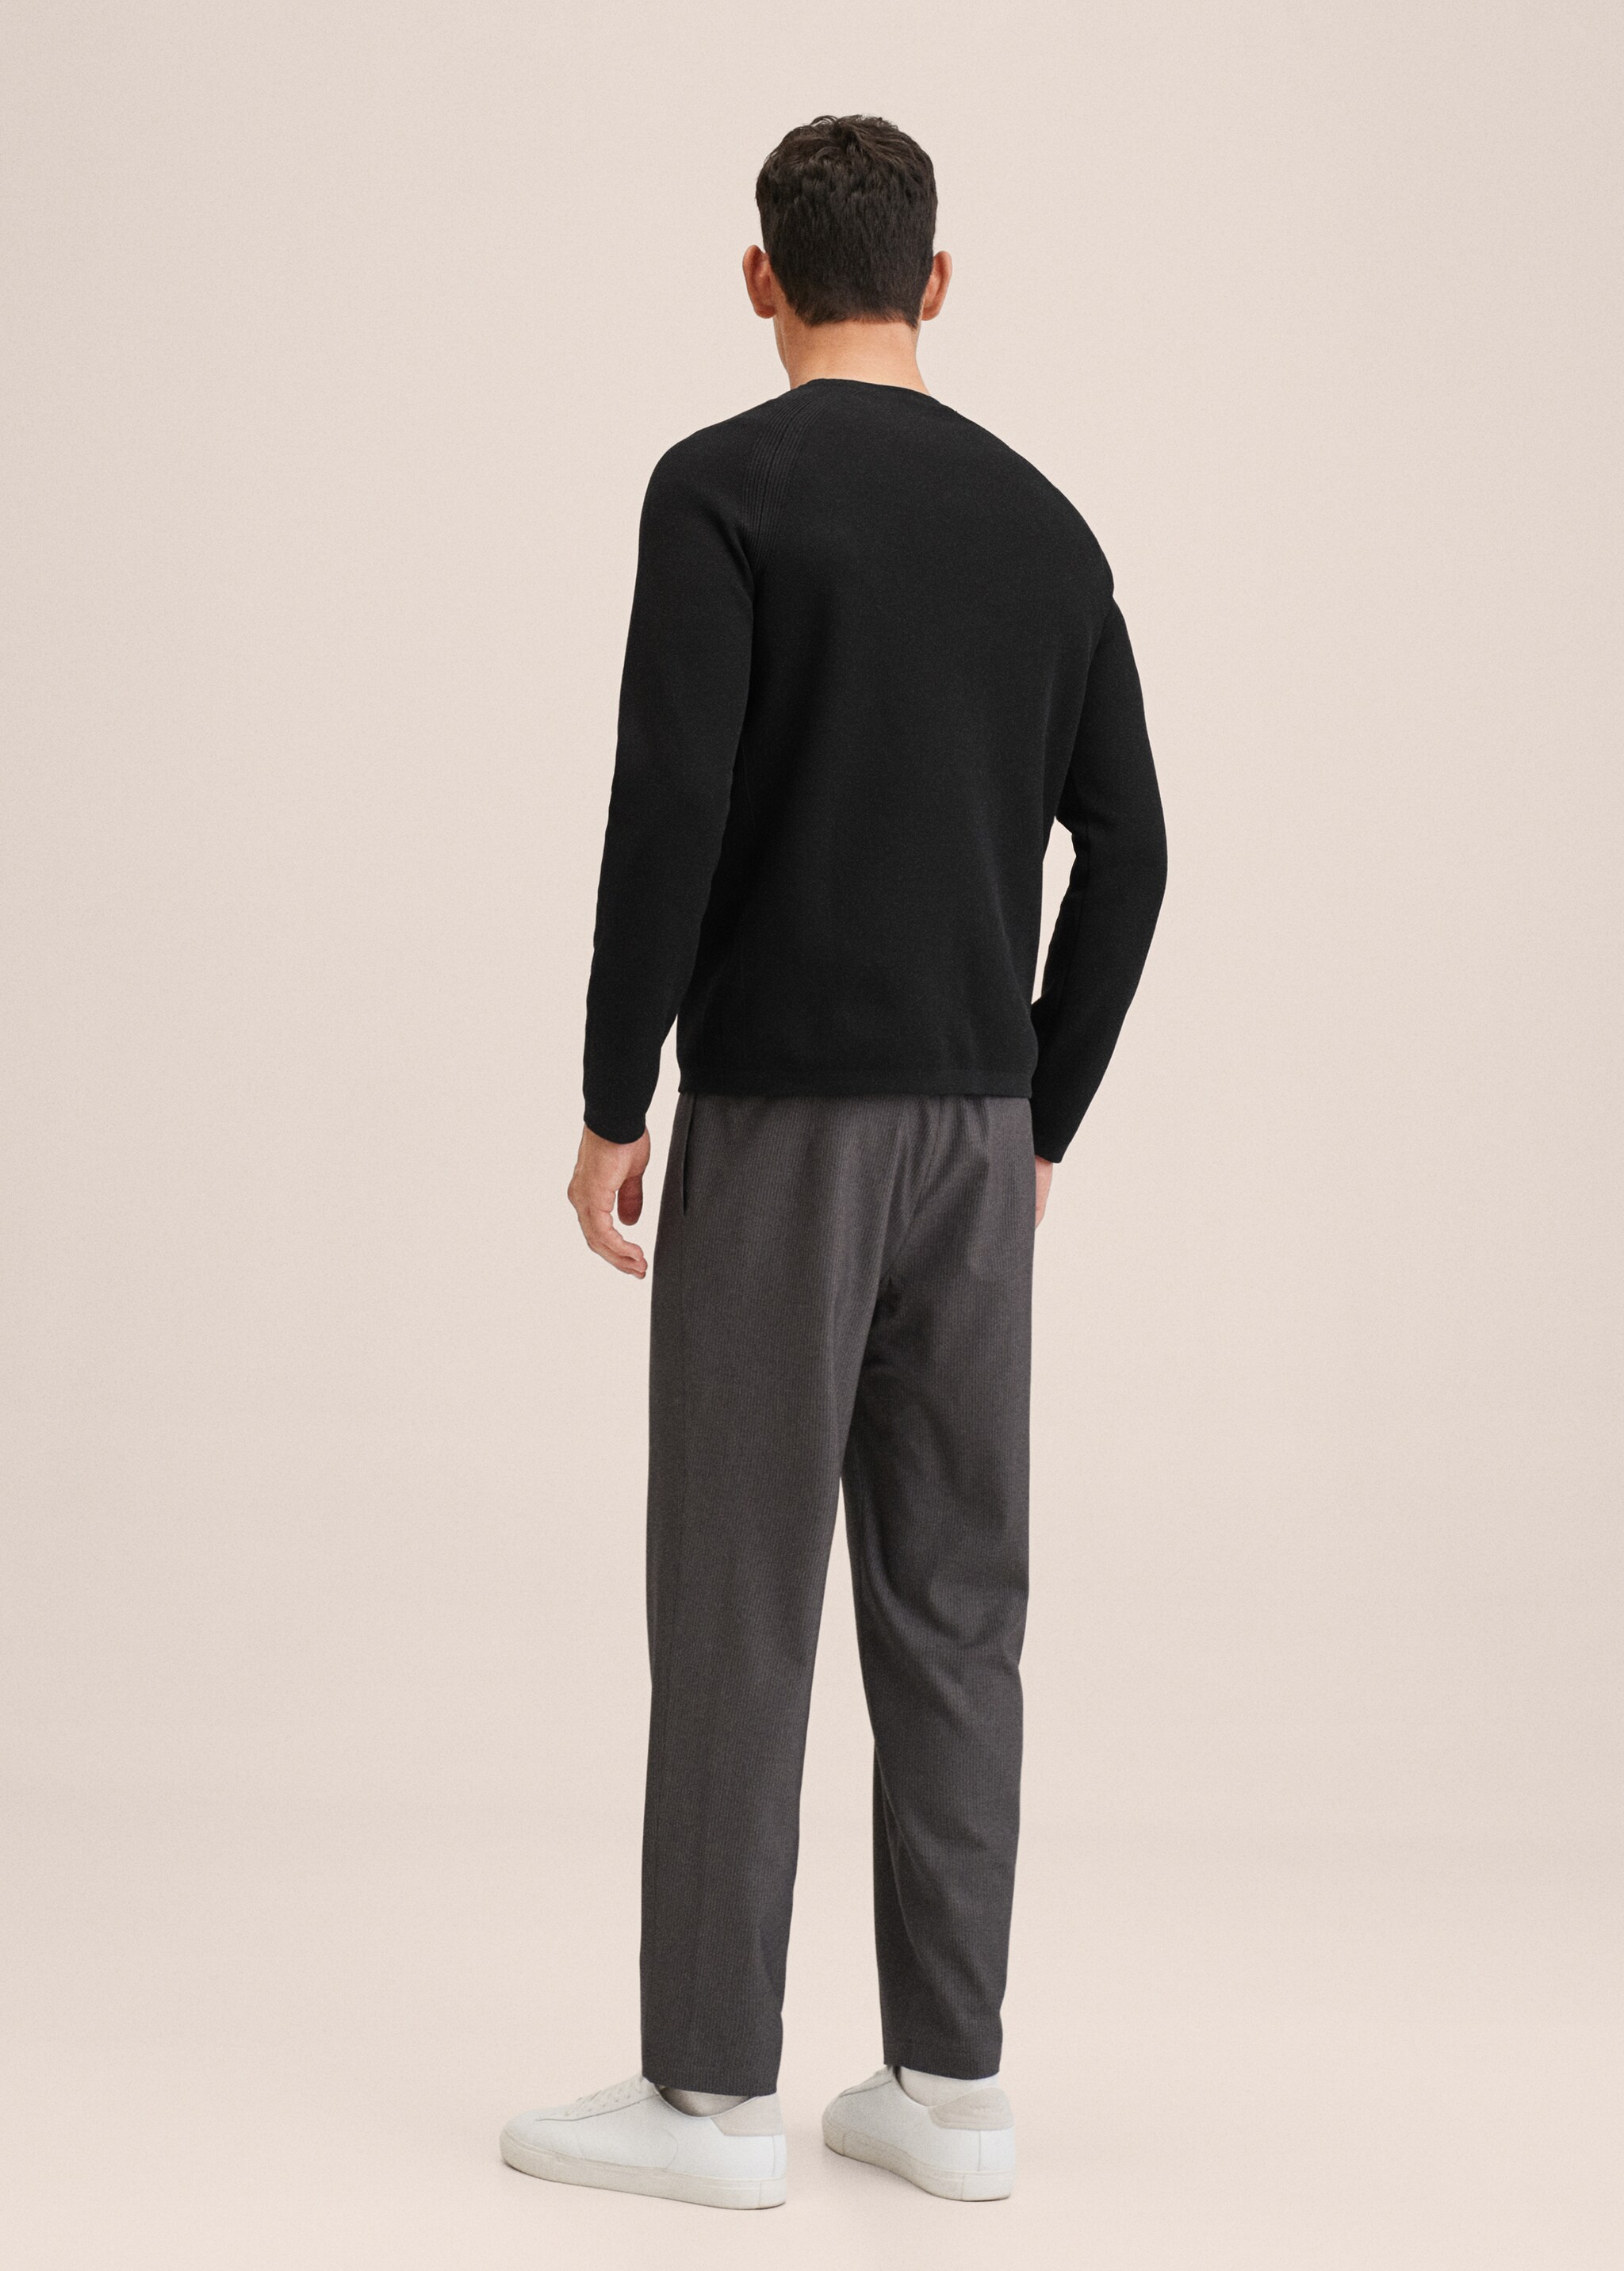 Crease-resistant stretch sweater - Reverse of the article